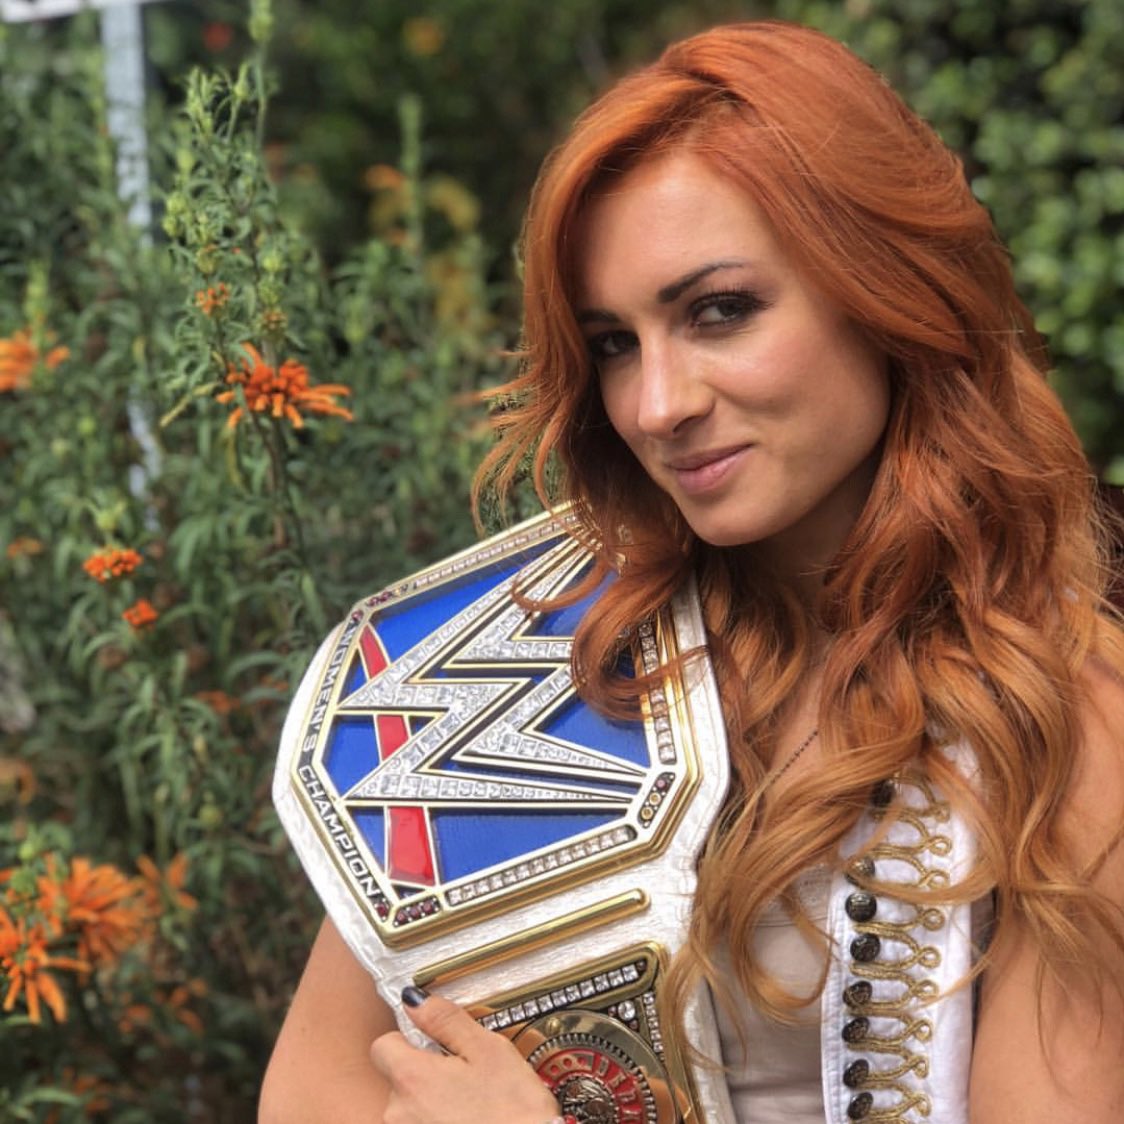 Day 113 of missing Becky Lynch from our screens!